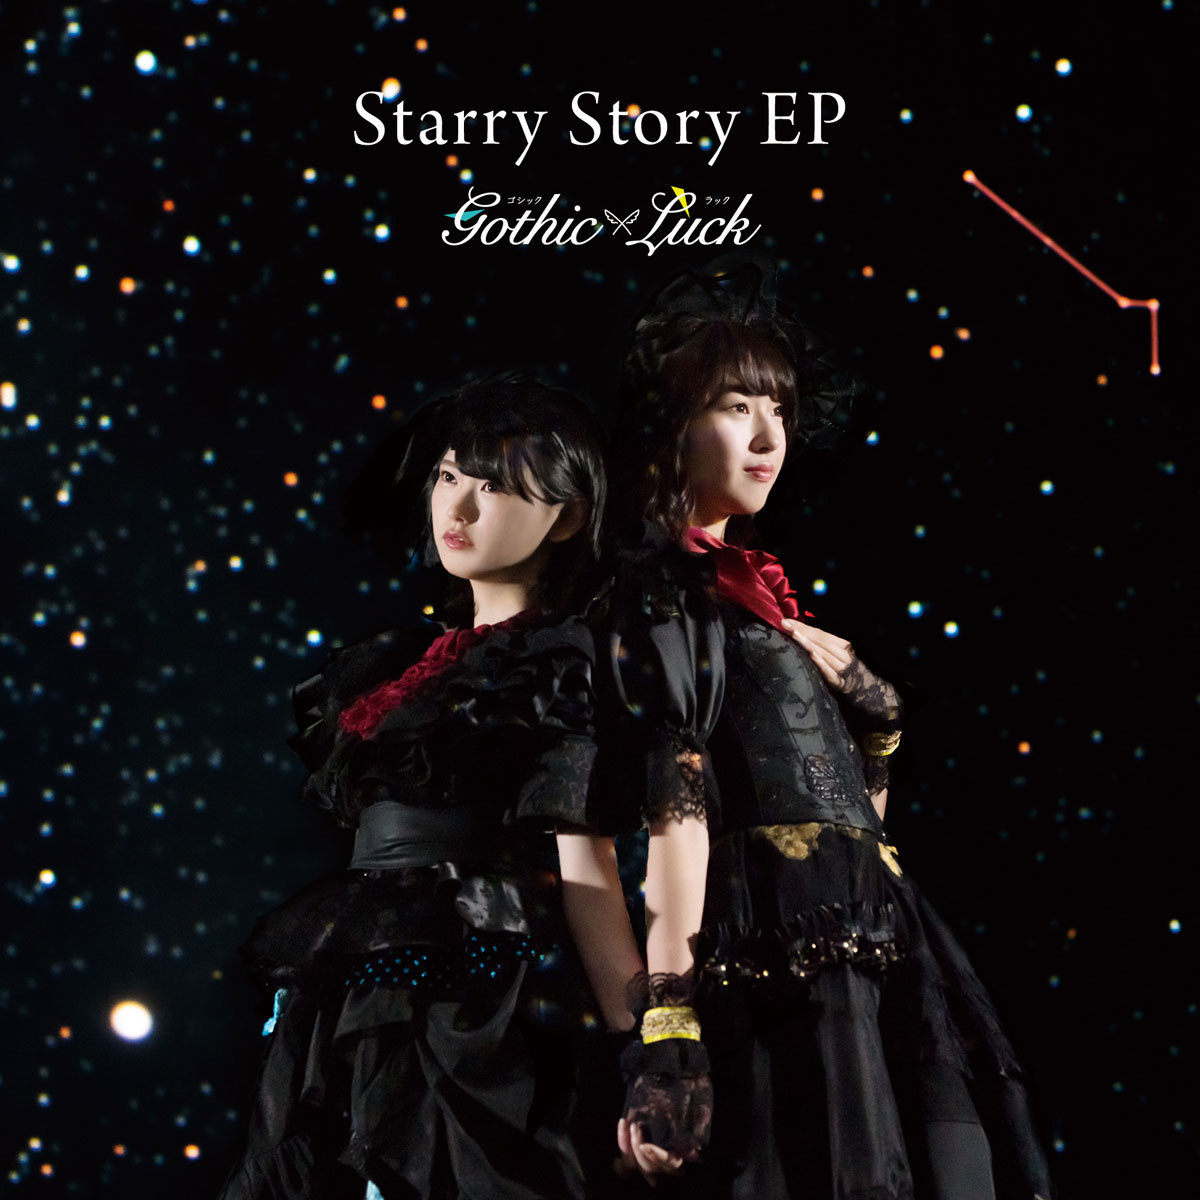 Gothic×Luck「Starry Story」 EP　通常盤 (C)けものフレンズプロジェクト2A